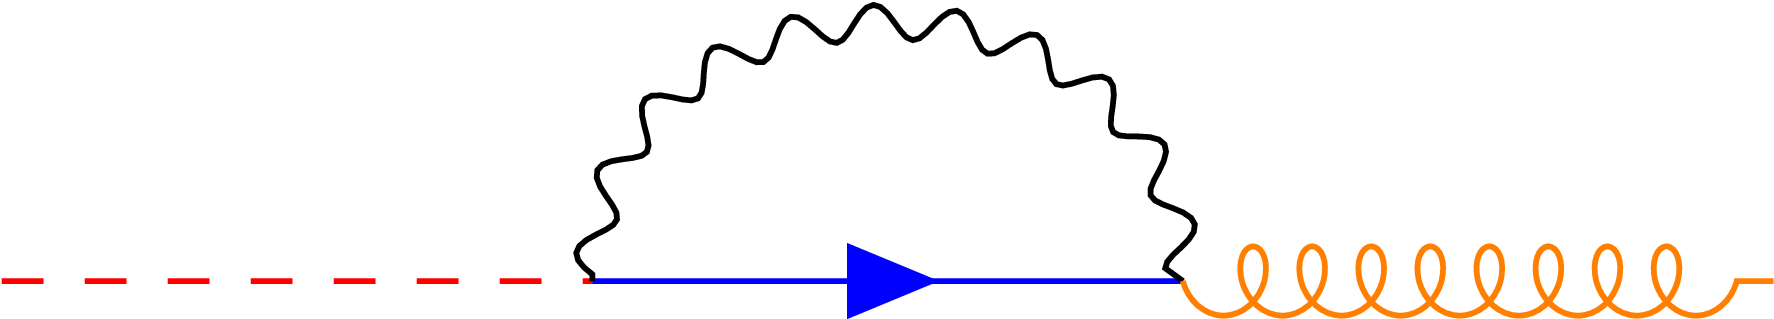 Curved Line Physics Diagram PNG